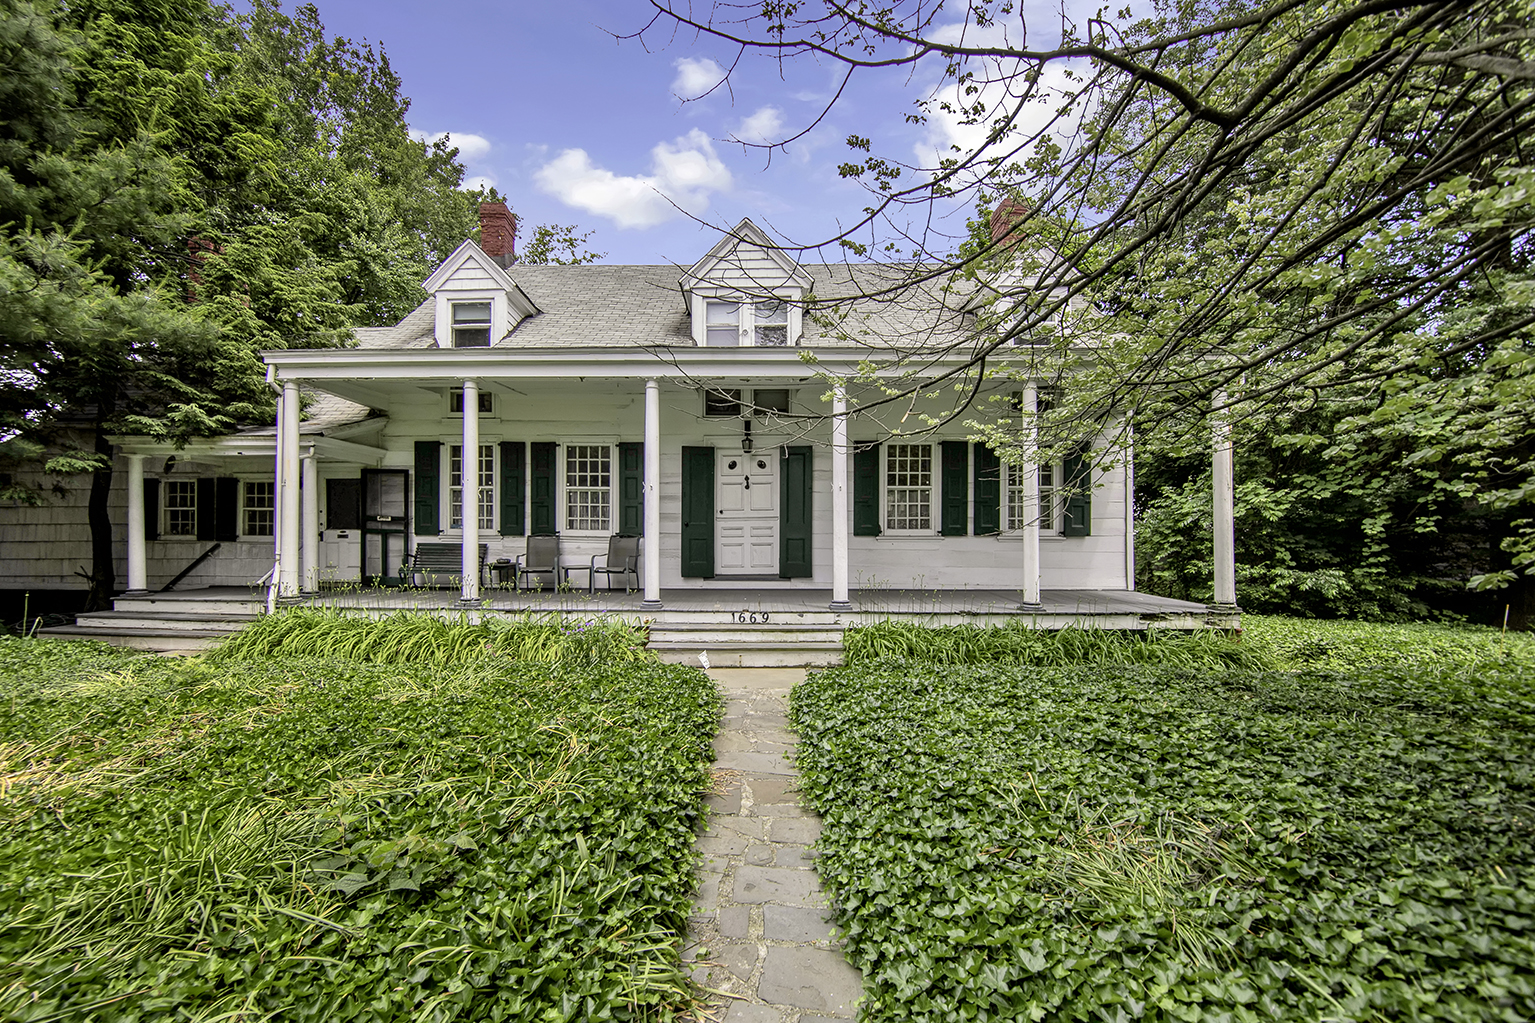 A farmhouse with a large front garden, and a porch with columns.